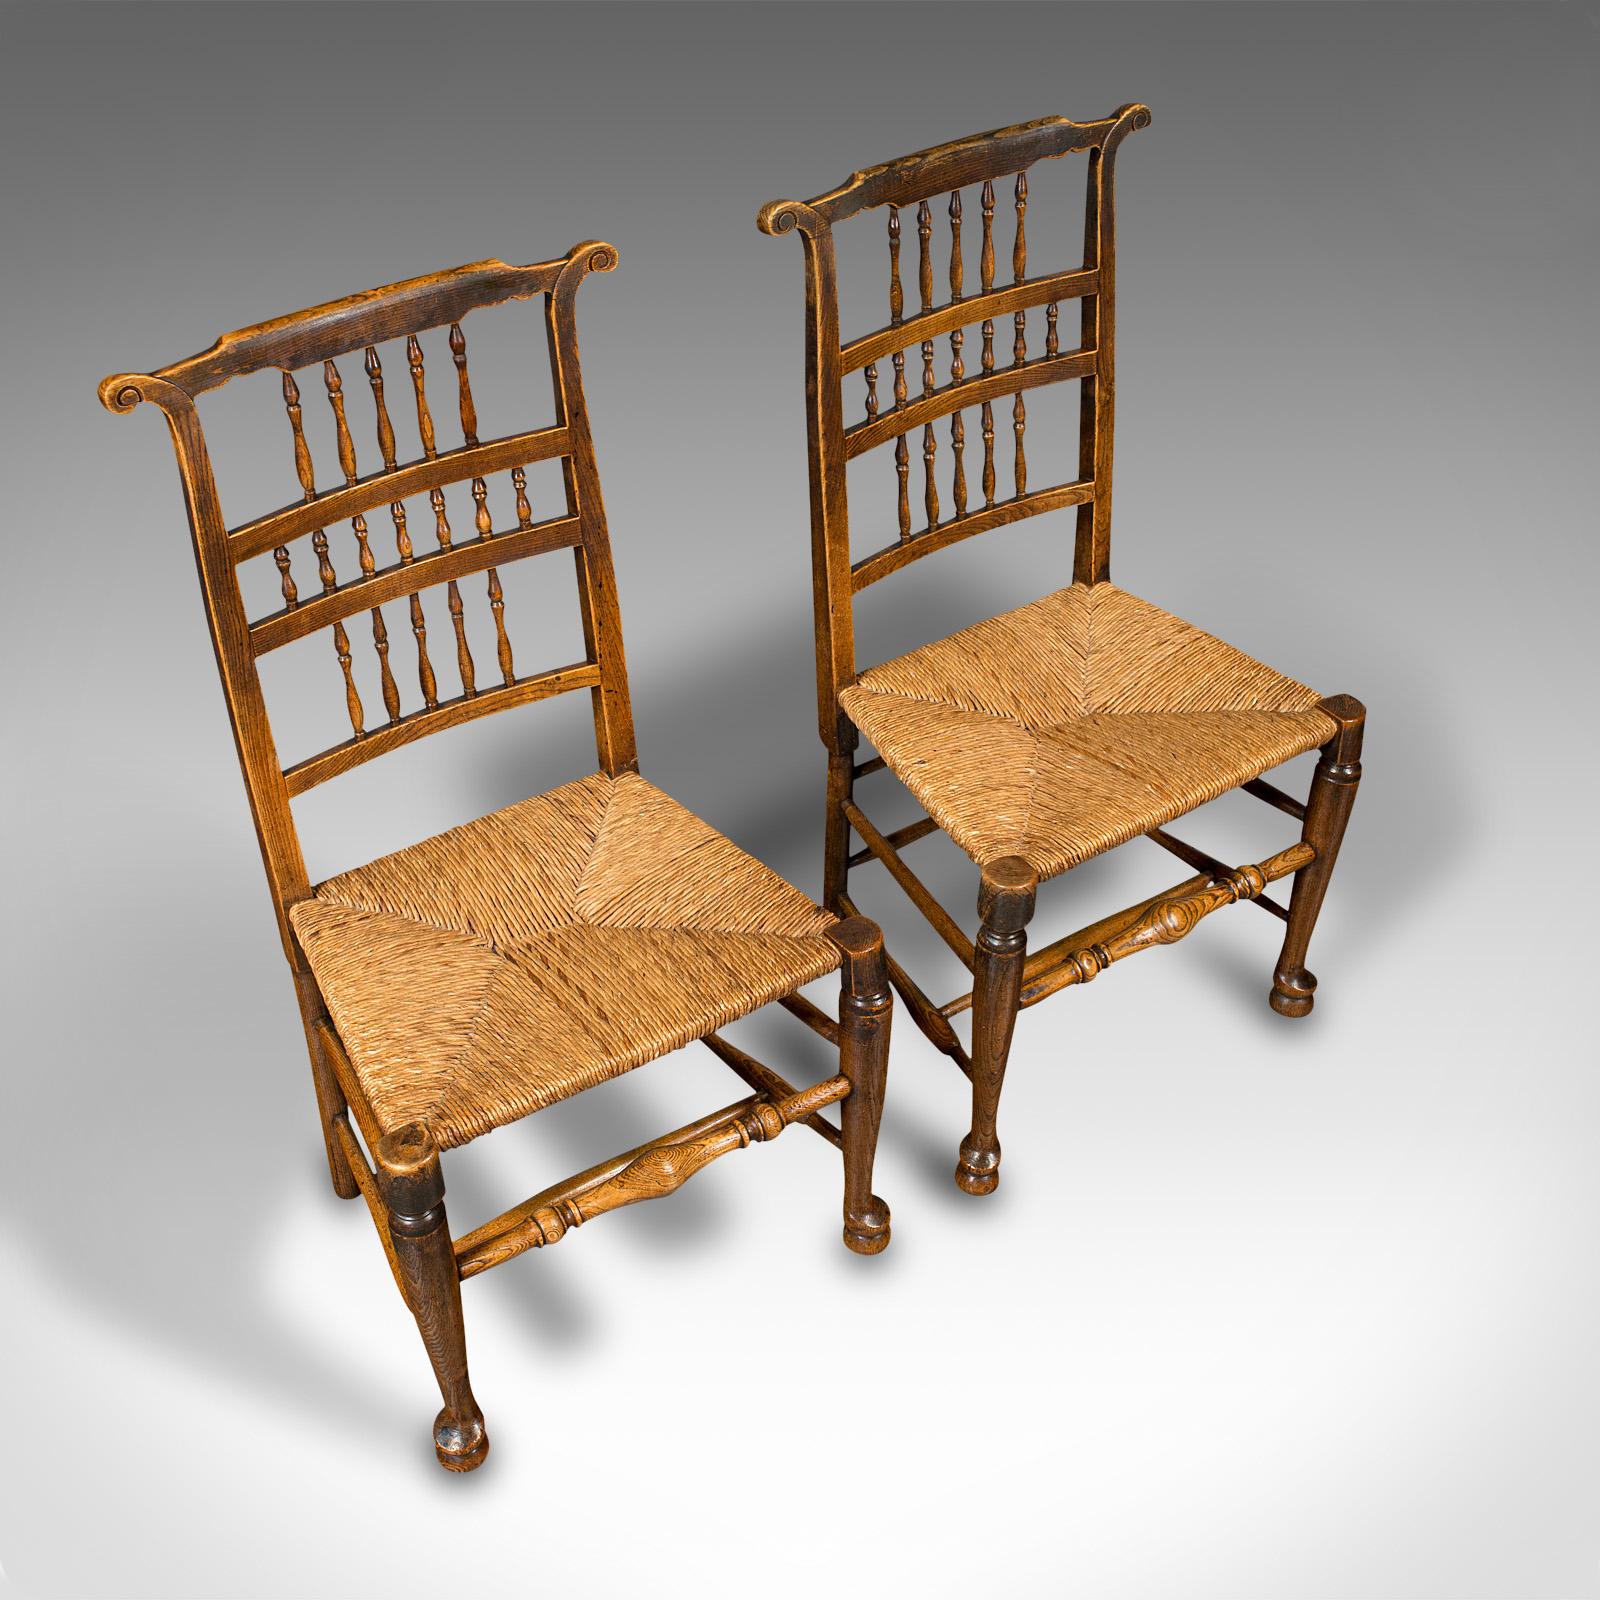 Pair of Antique Spindleback Rush Chairs, English, Hall, Lancashire, Victorian In Good Condition For Sale In Hele, Devon, GB